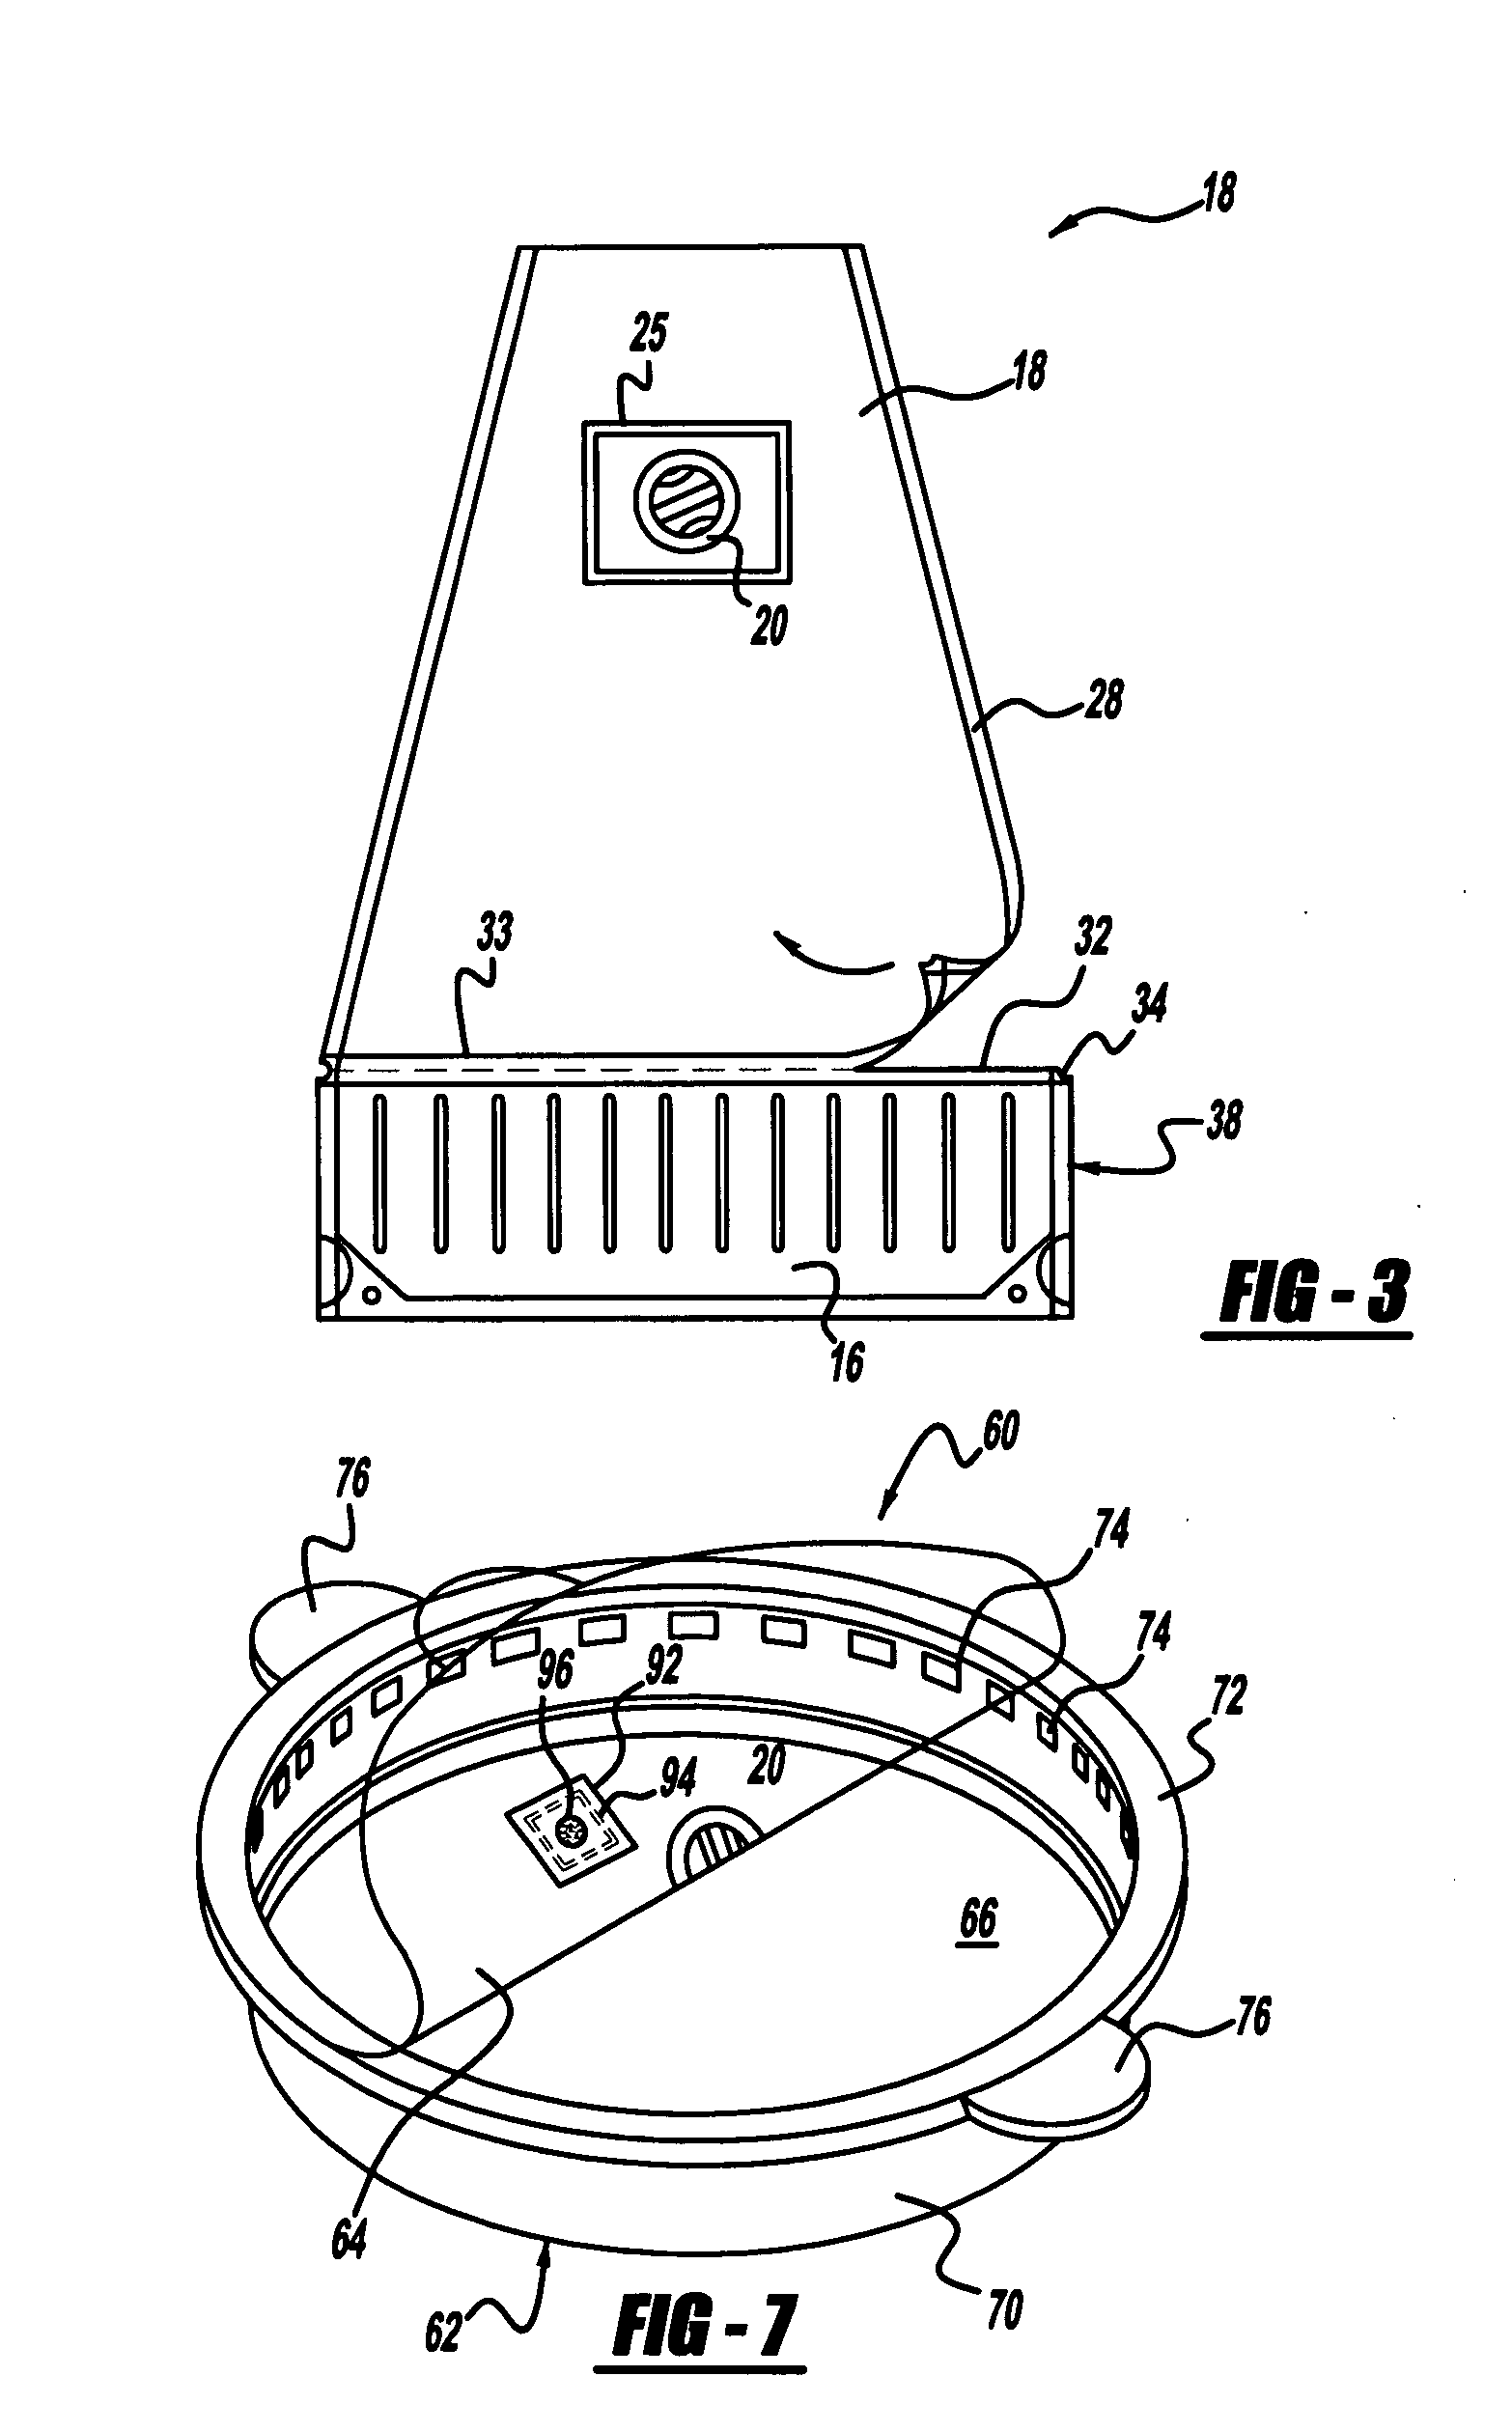 Heatable package with frangible seal and method of manufacture